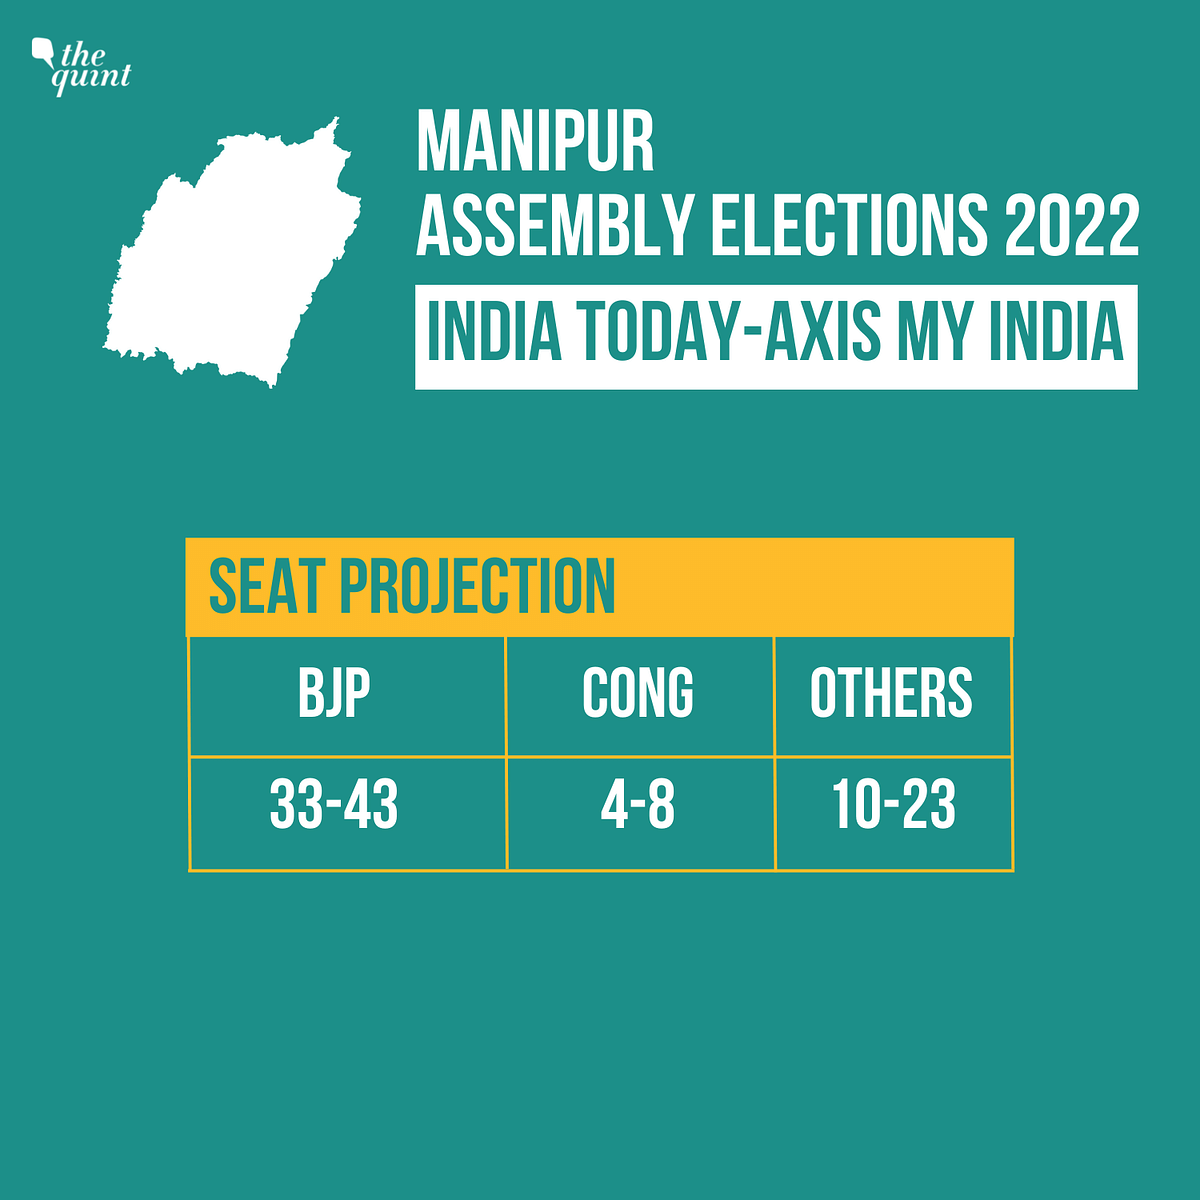 Catch the exit poll results for Manipur Assembly elections here.